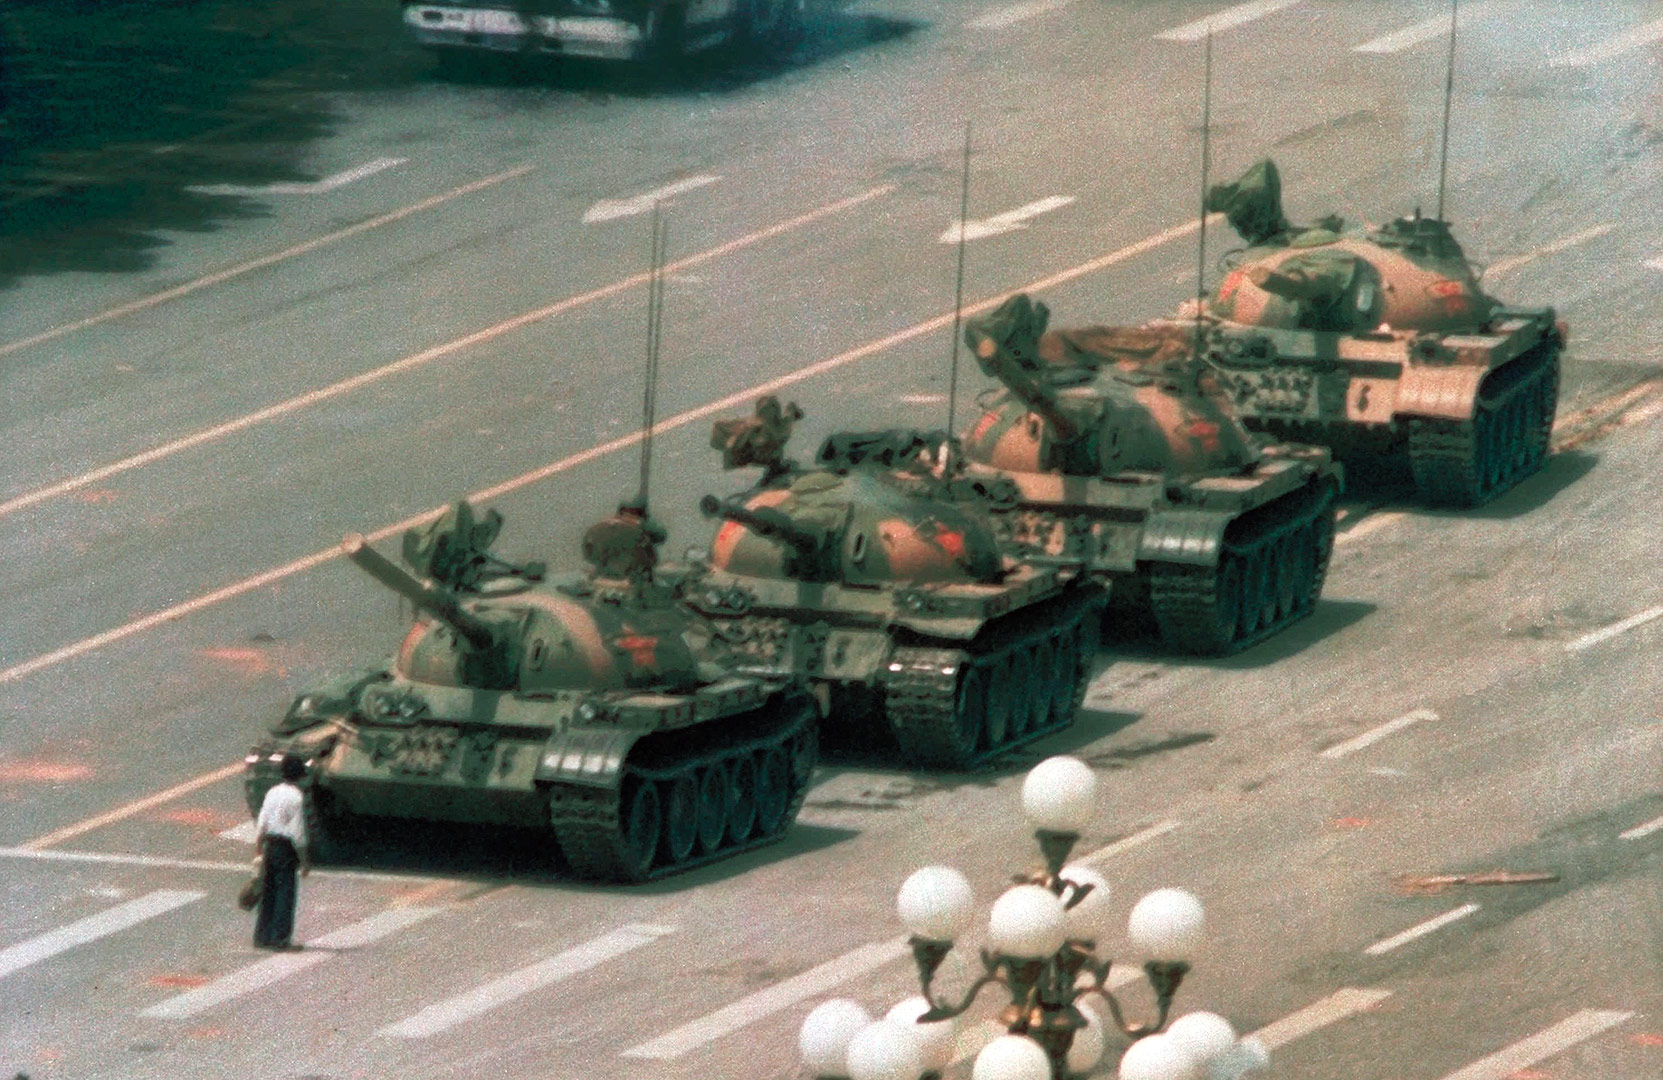 Tank Man -  Later becoming a defiant symbol of resistance around the world, Jeff Widener’s iconic photo of a regular man stepping in front of a line of tanks to block their path initially needed to be protected from governmental confiscation. Pulitzer Prize winning photographer Liu Heung-Shing, who was also covering the incident, advised Widener to hide the film in his hotel room after learning about his photos. Widener then went down to the hotel lobby, found a blonde American man with a ponytail and backpack, and paid him to sneak the film past plainclothes police and to the Associated Press. The tank man himself remains unknown.